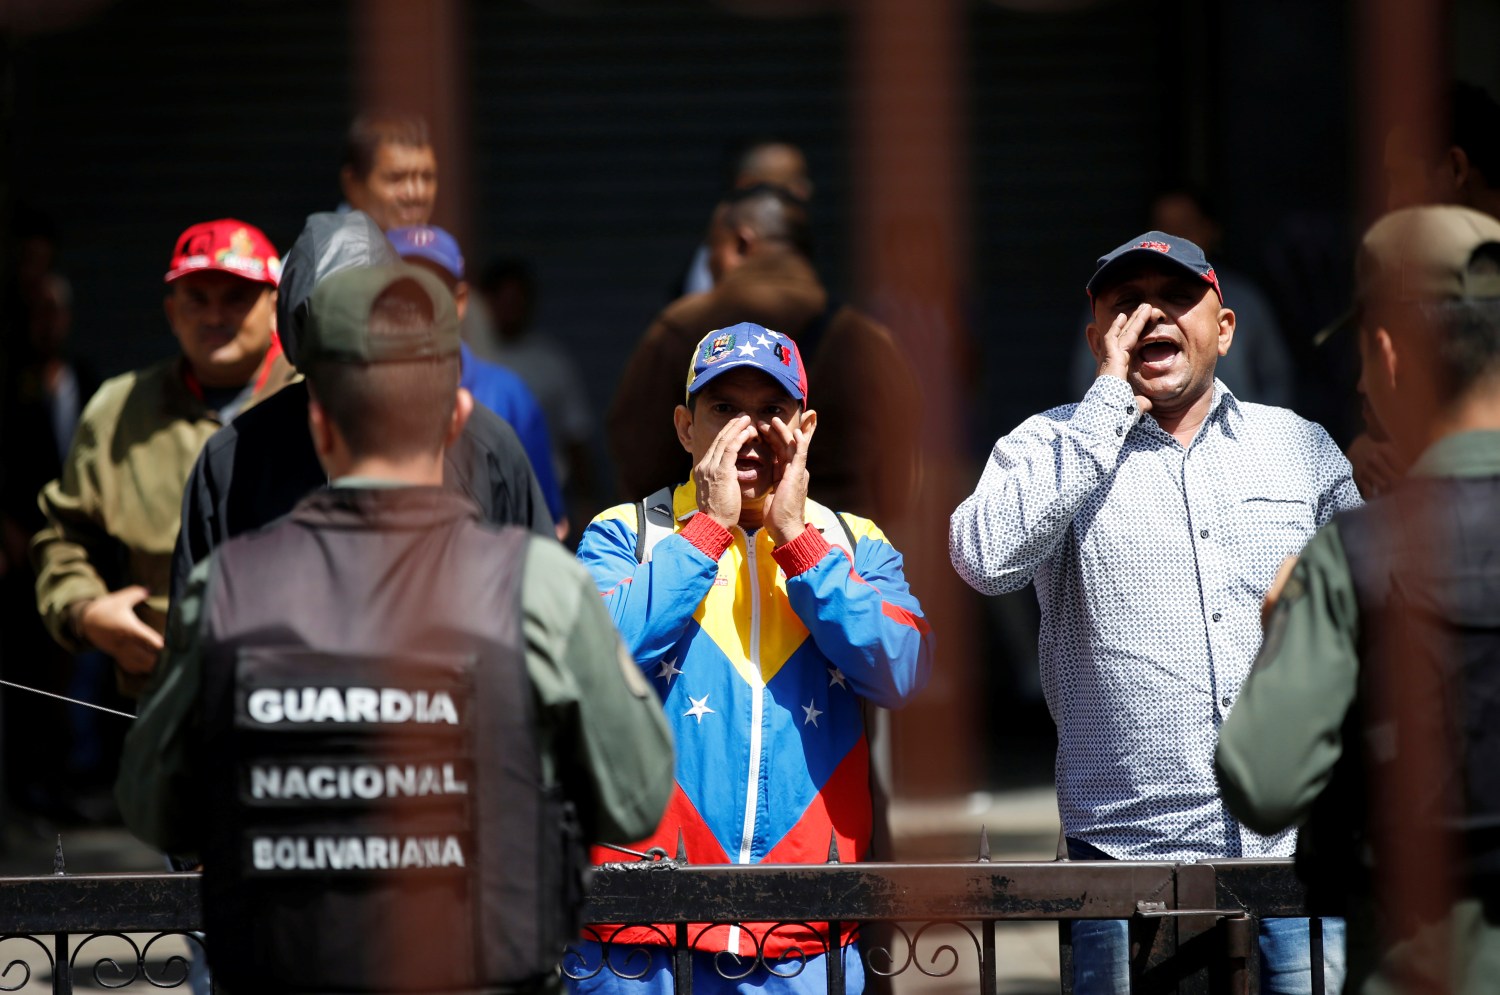 Government supporters shout while standing outside the National Assembly, in Caracas, Venezuela July 5, 2017. REUTERS/Andres Martinez Casares - RTX3A72V